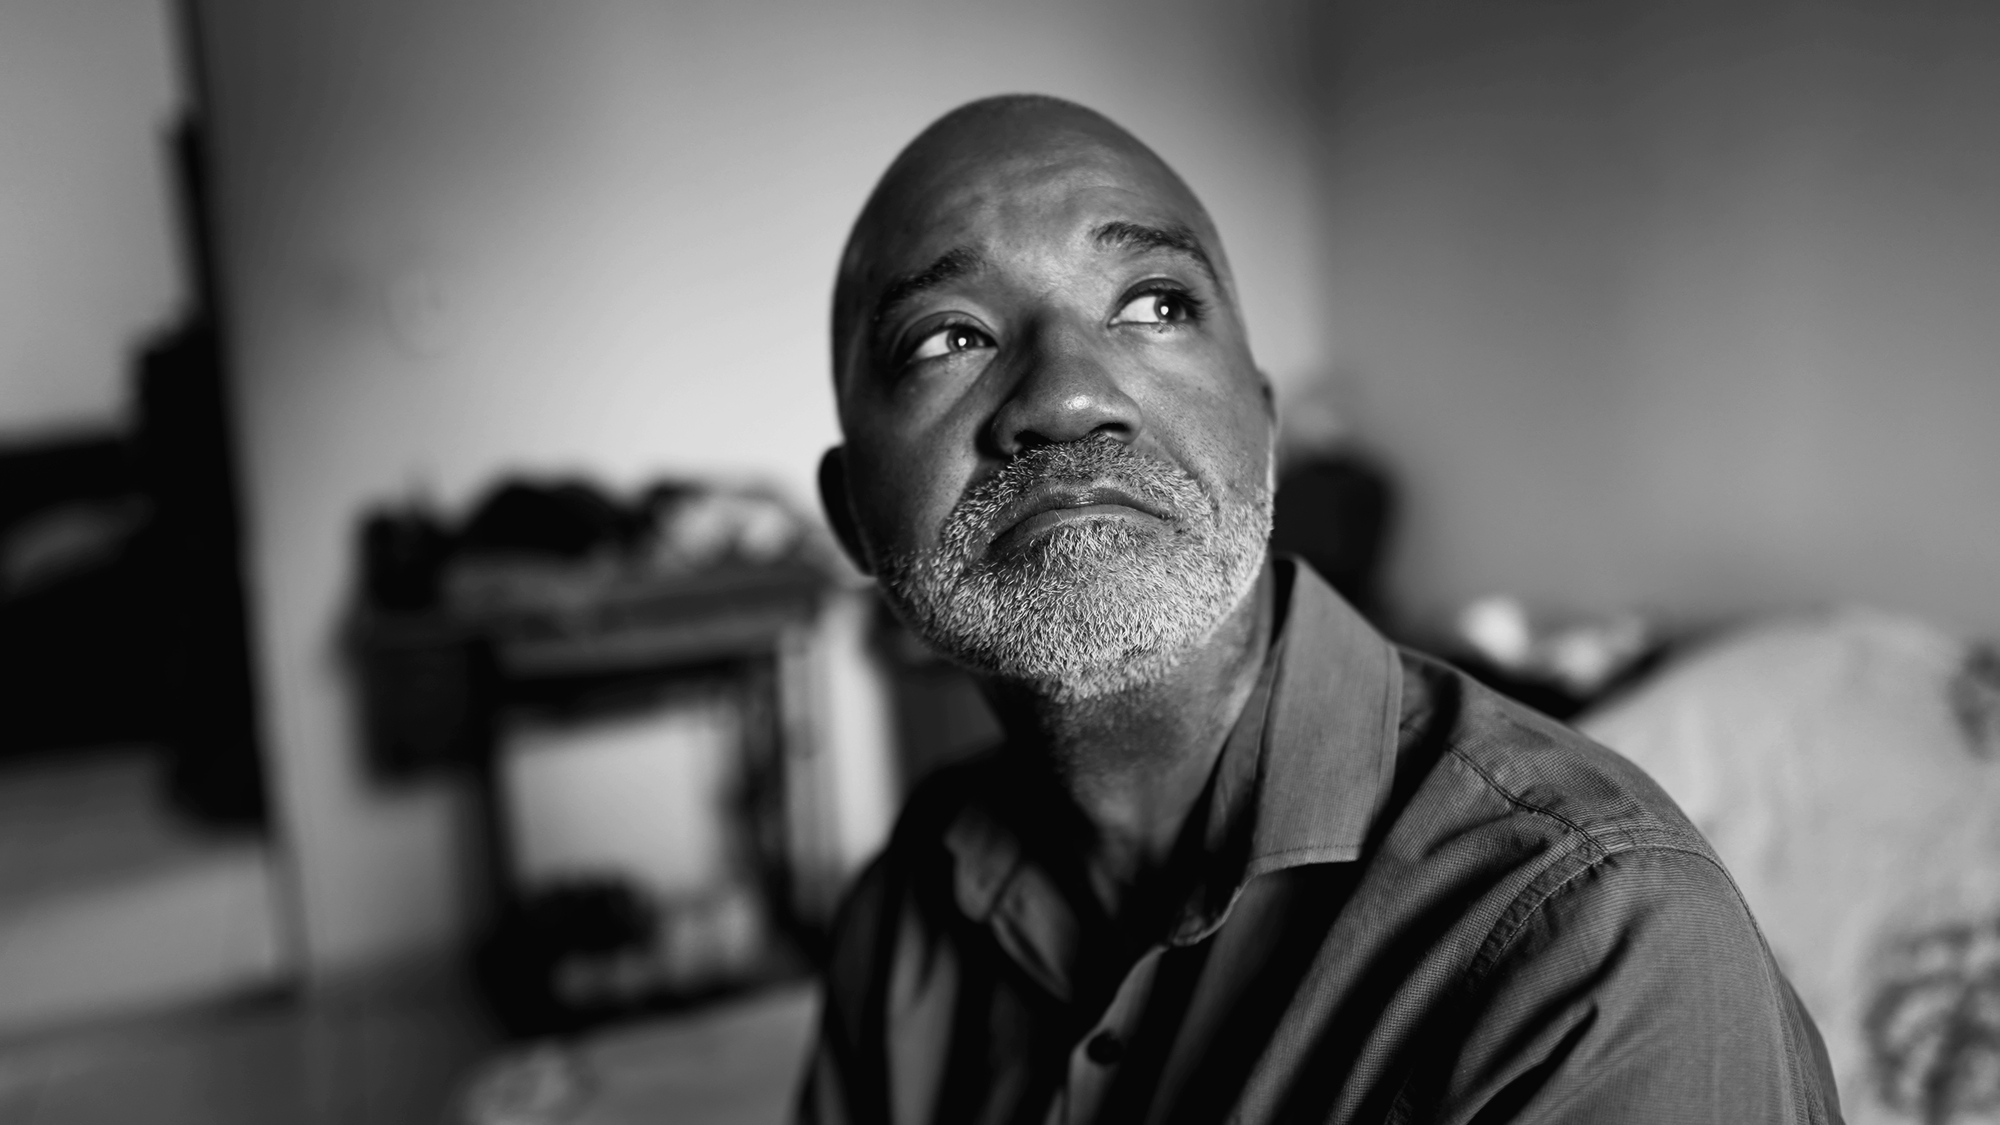 A grayscale close-up of a man with a bald head and gray beard. He wears a collared shirt and gazes thoughtfully upward to his right. The background is softly blurred, showing indistinct indoor surroundings like furniture and other objects.